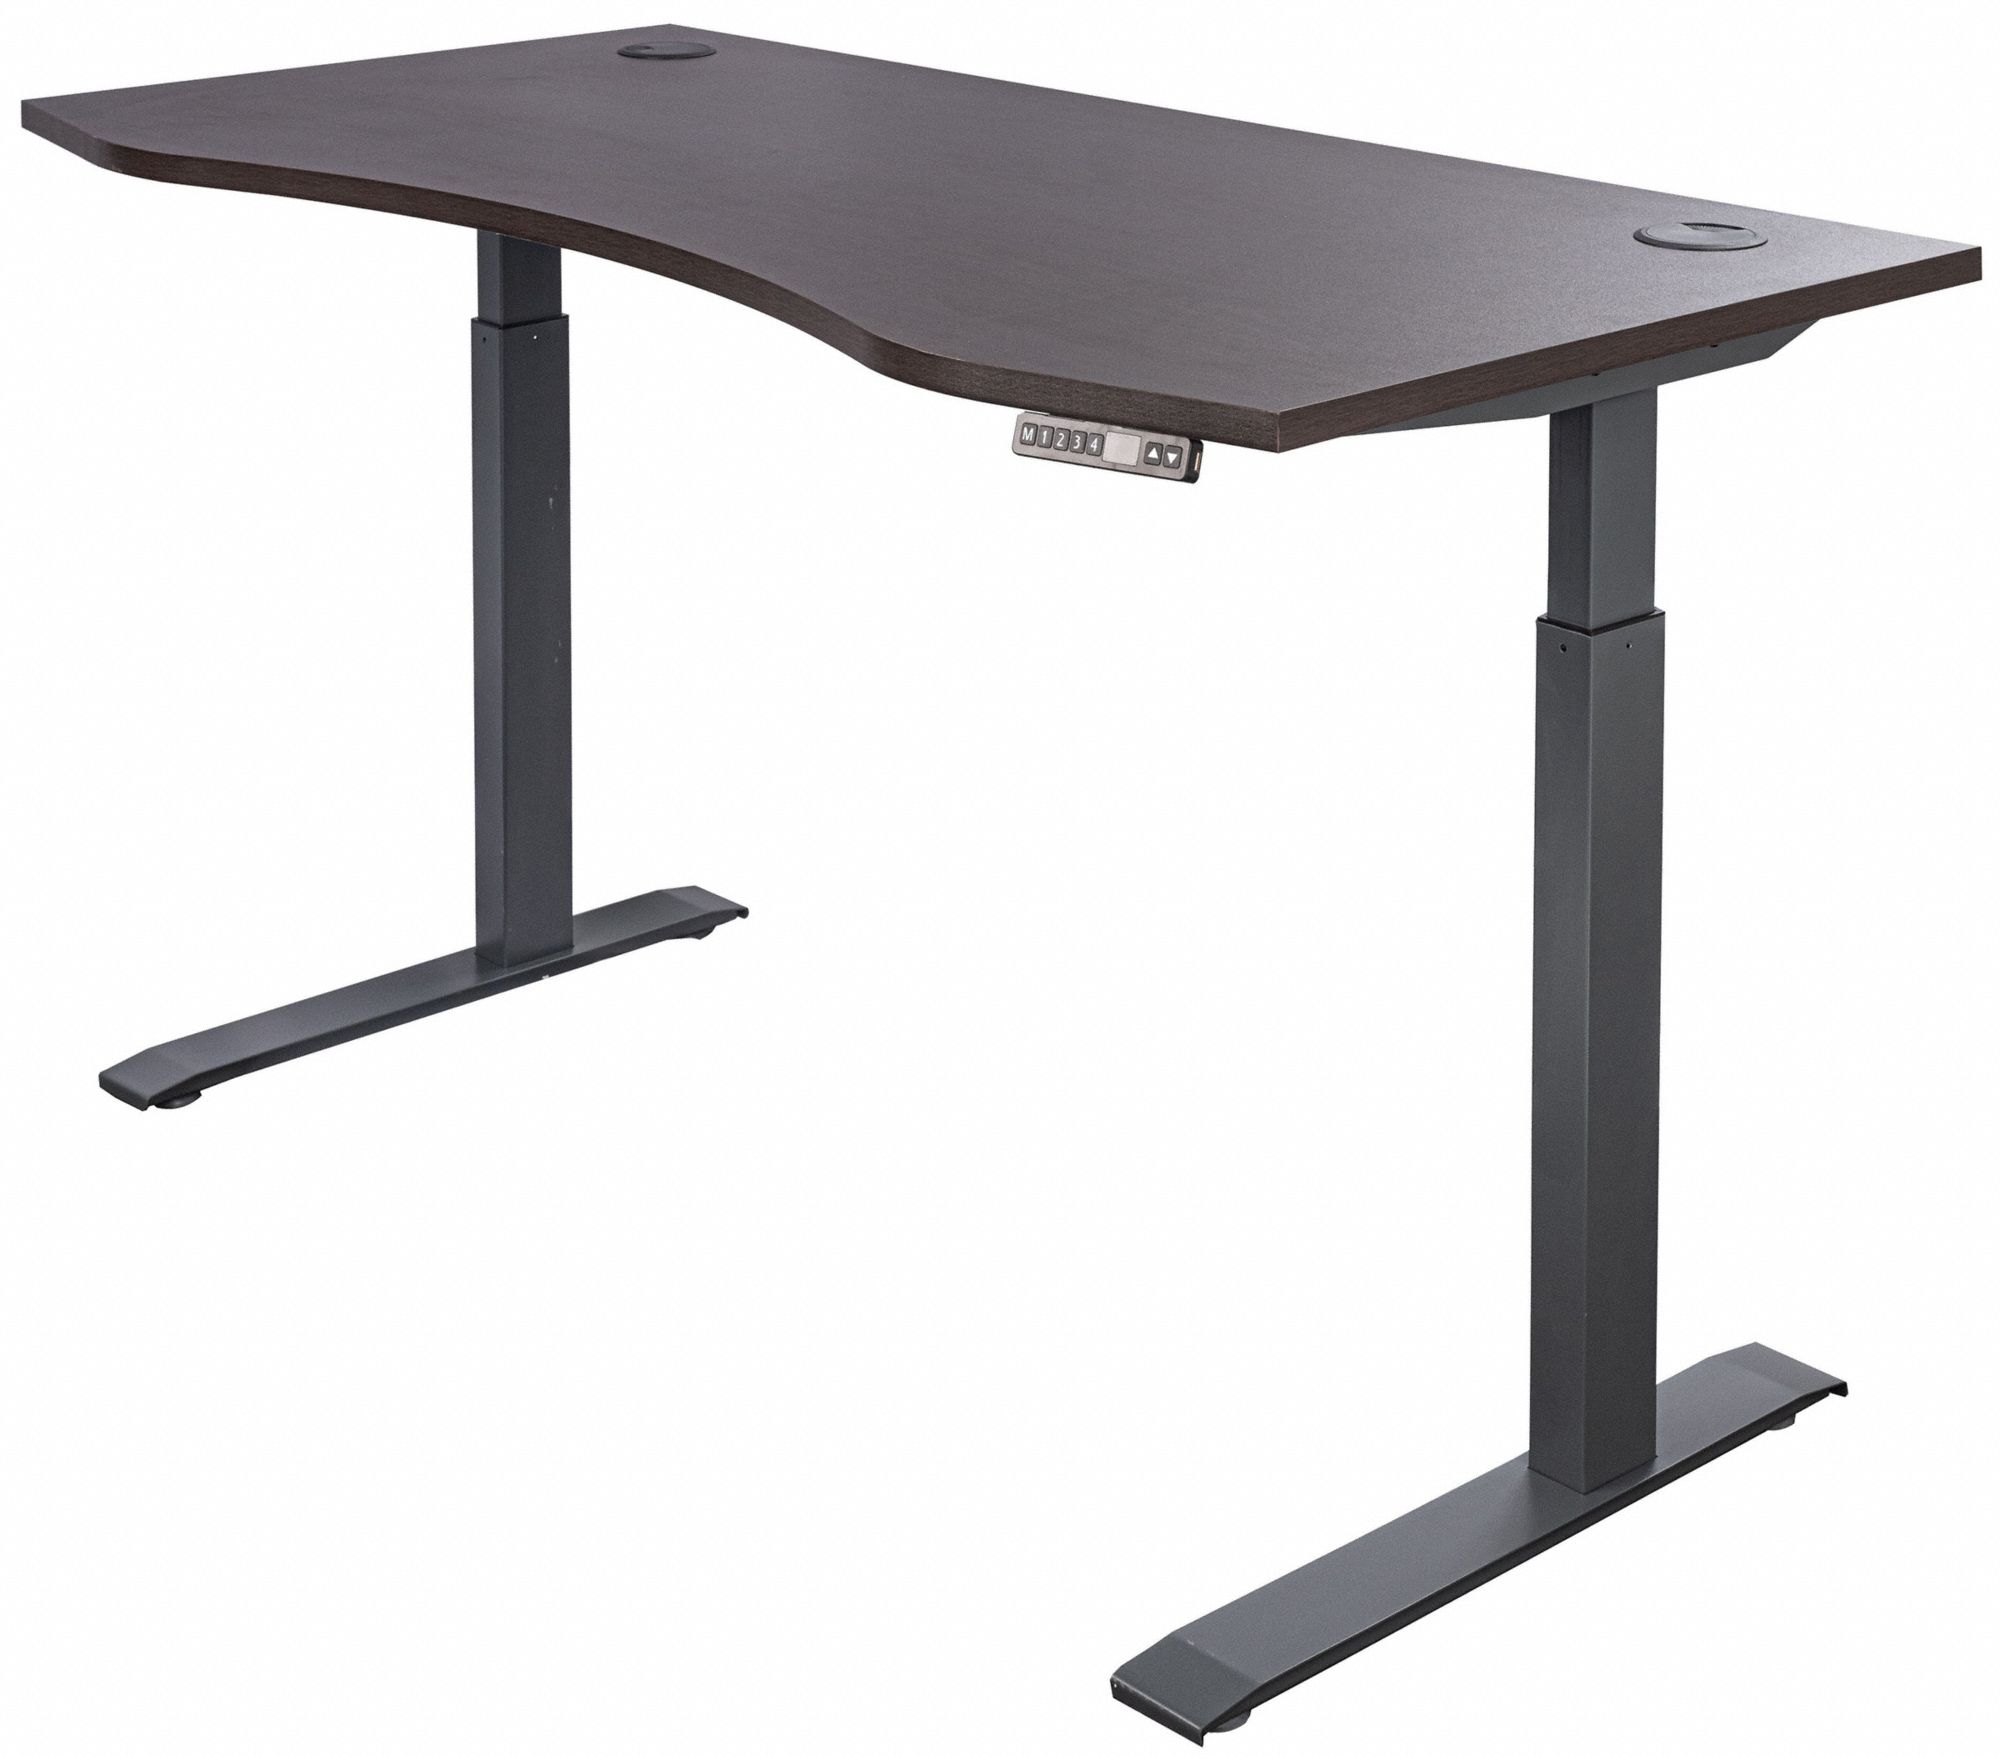 Height Adjustable Desk: 60 in Overall Wd, 28 in to 48 in, 30 in Overall Dp, Walnut Top